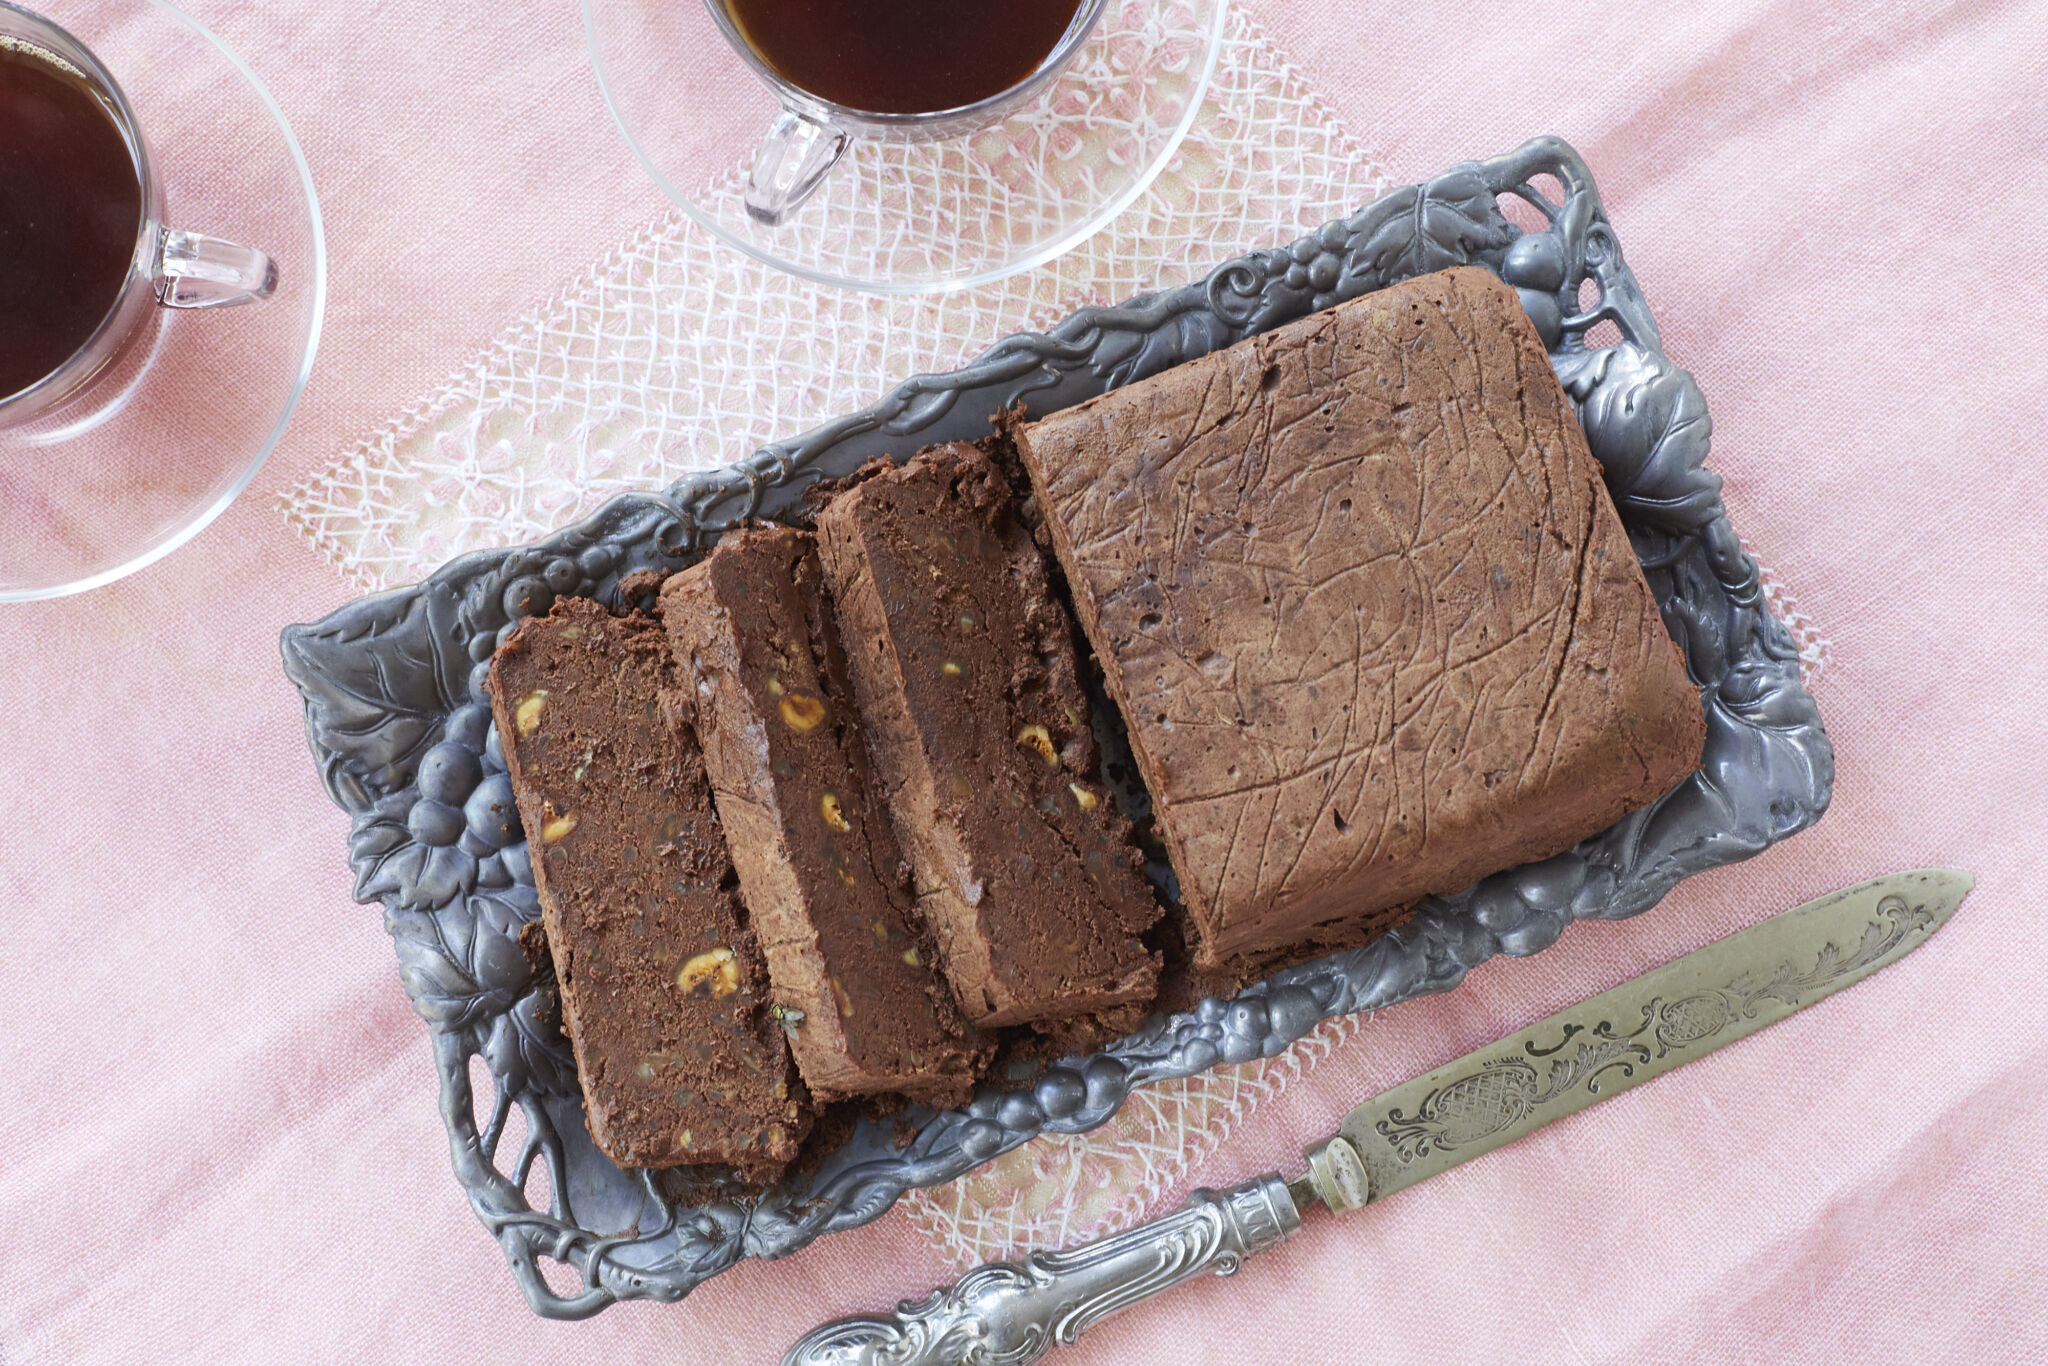 Mocha Pâté is sliced and served on a tray with two glass cups of coffee. It's a cross between rich fudge and velvety mousse, and studded with toasted hazelnuts that perfectly set off the dessert's lush texture.